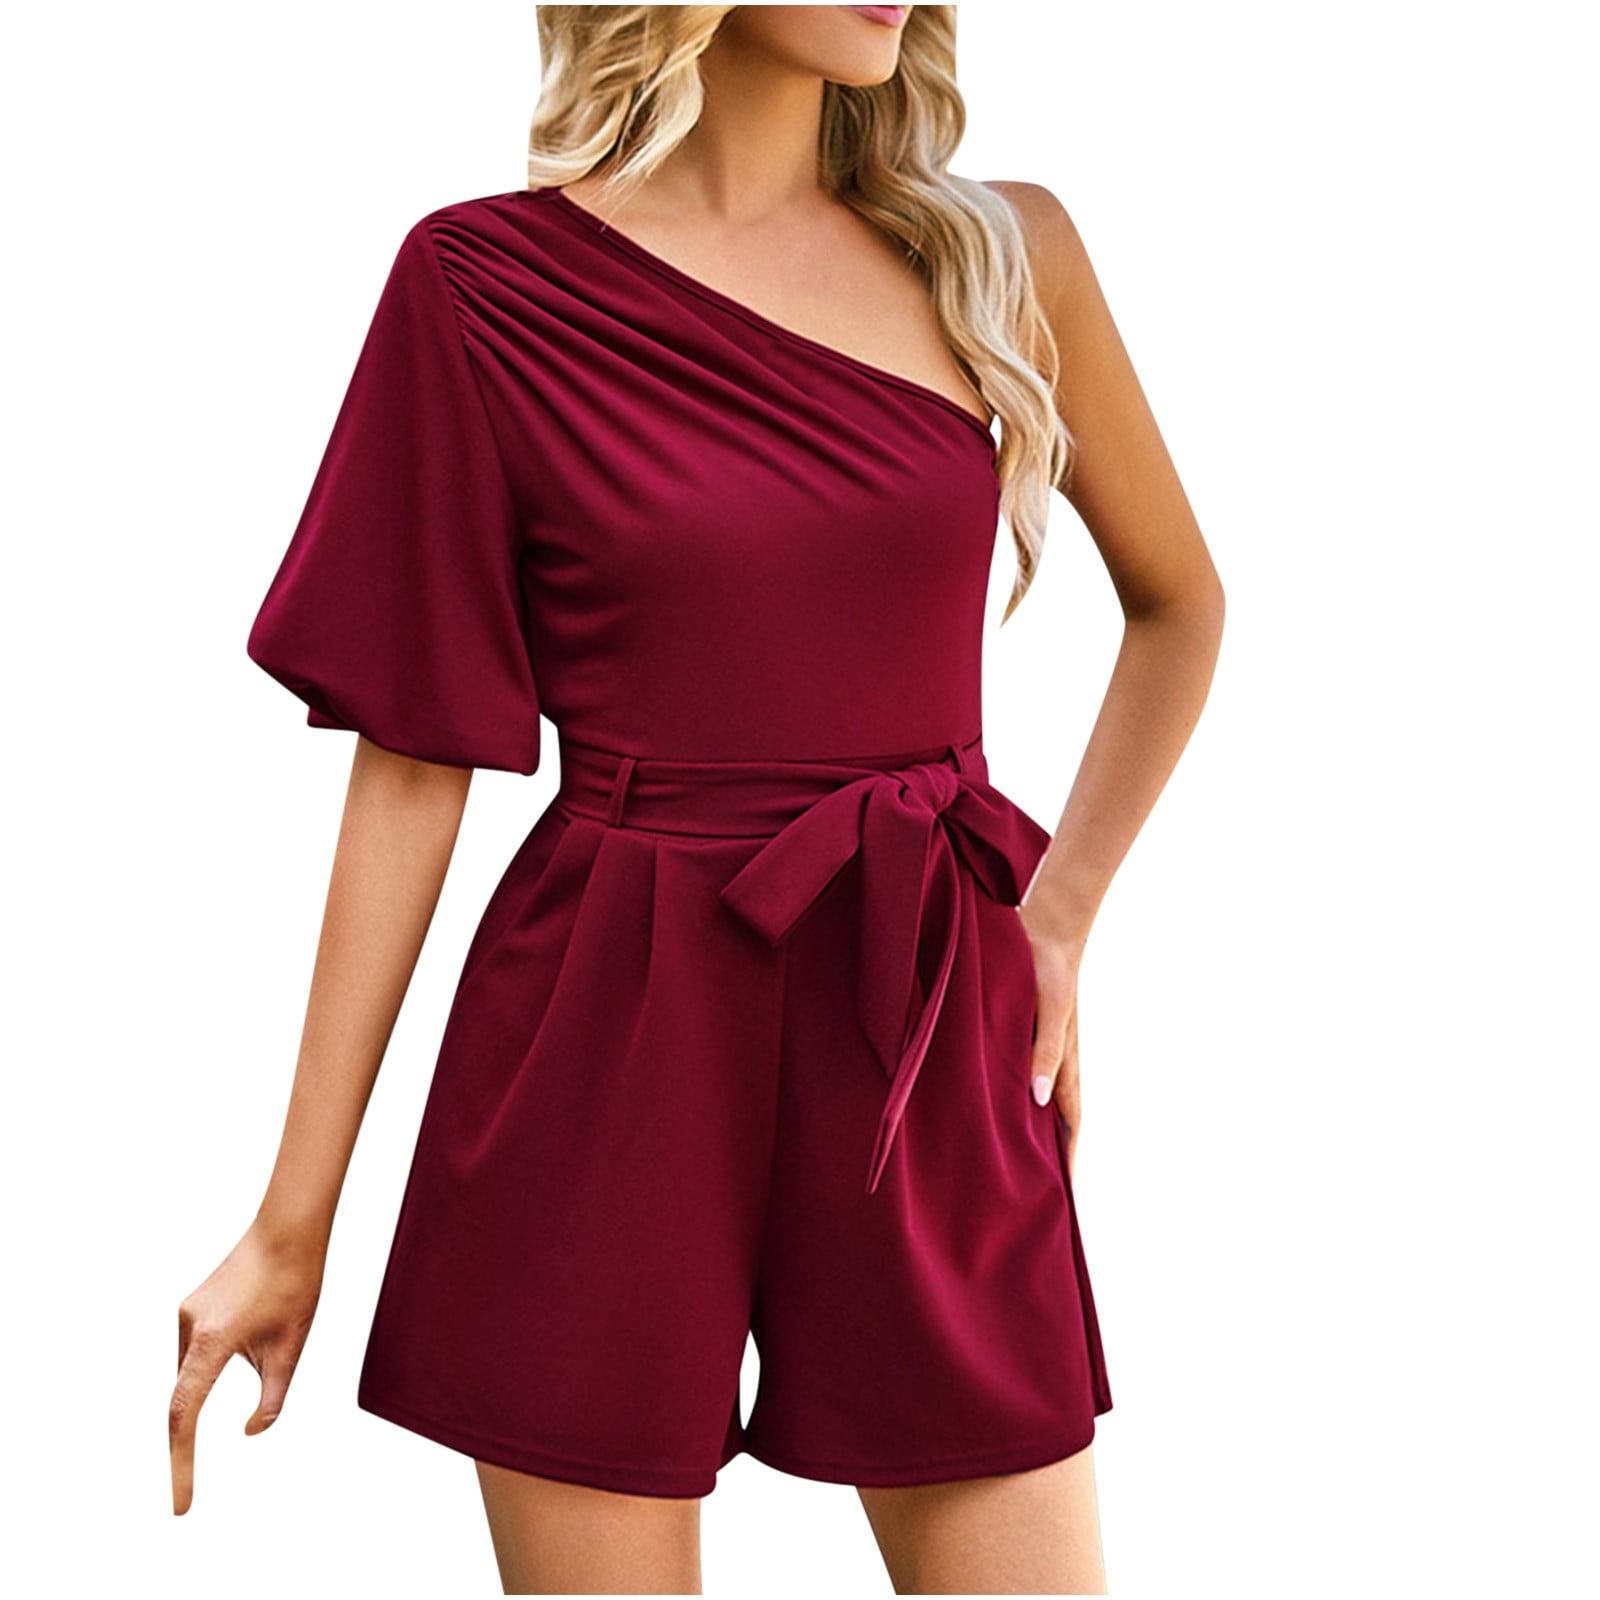 YYDGH Women's 2023 Summer One Shoulder Romper Ruffle Short Sleeve Boho  Floral Print Tie Waist Party Beach Casual Short Jumpsuits Wine Red S